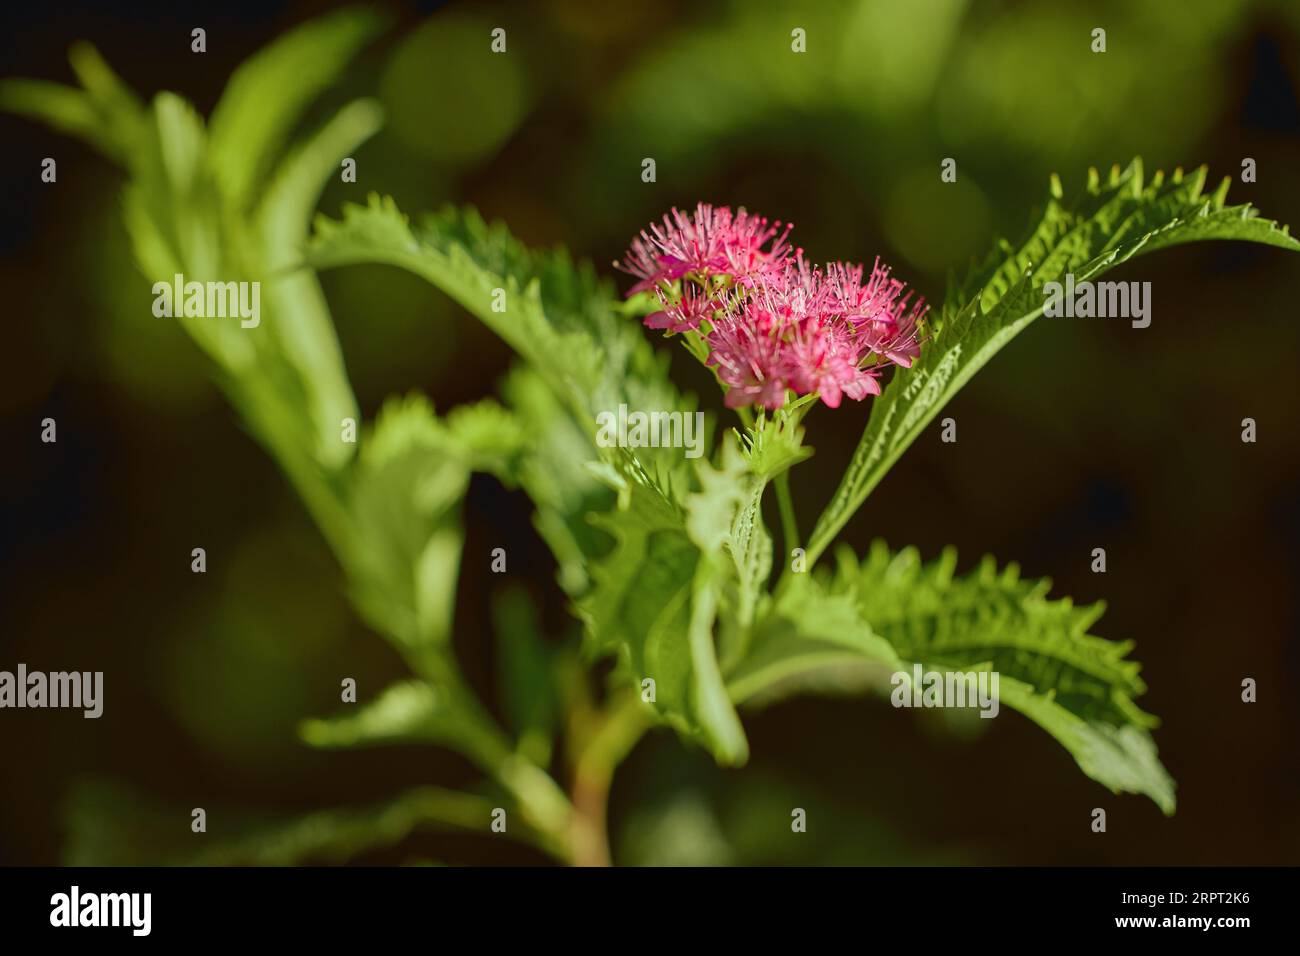 Japanese spirea (Spiraea japonica) bushes with delicate pink and white flowers in stone gargen close up. Gardening, floriculture, macro. Stock Photo